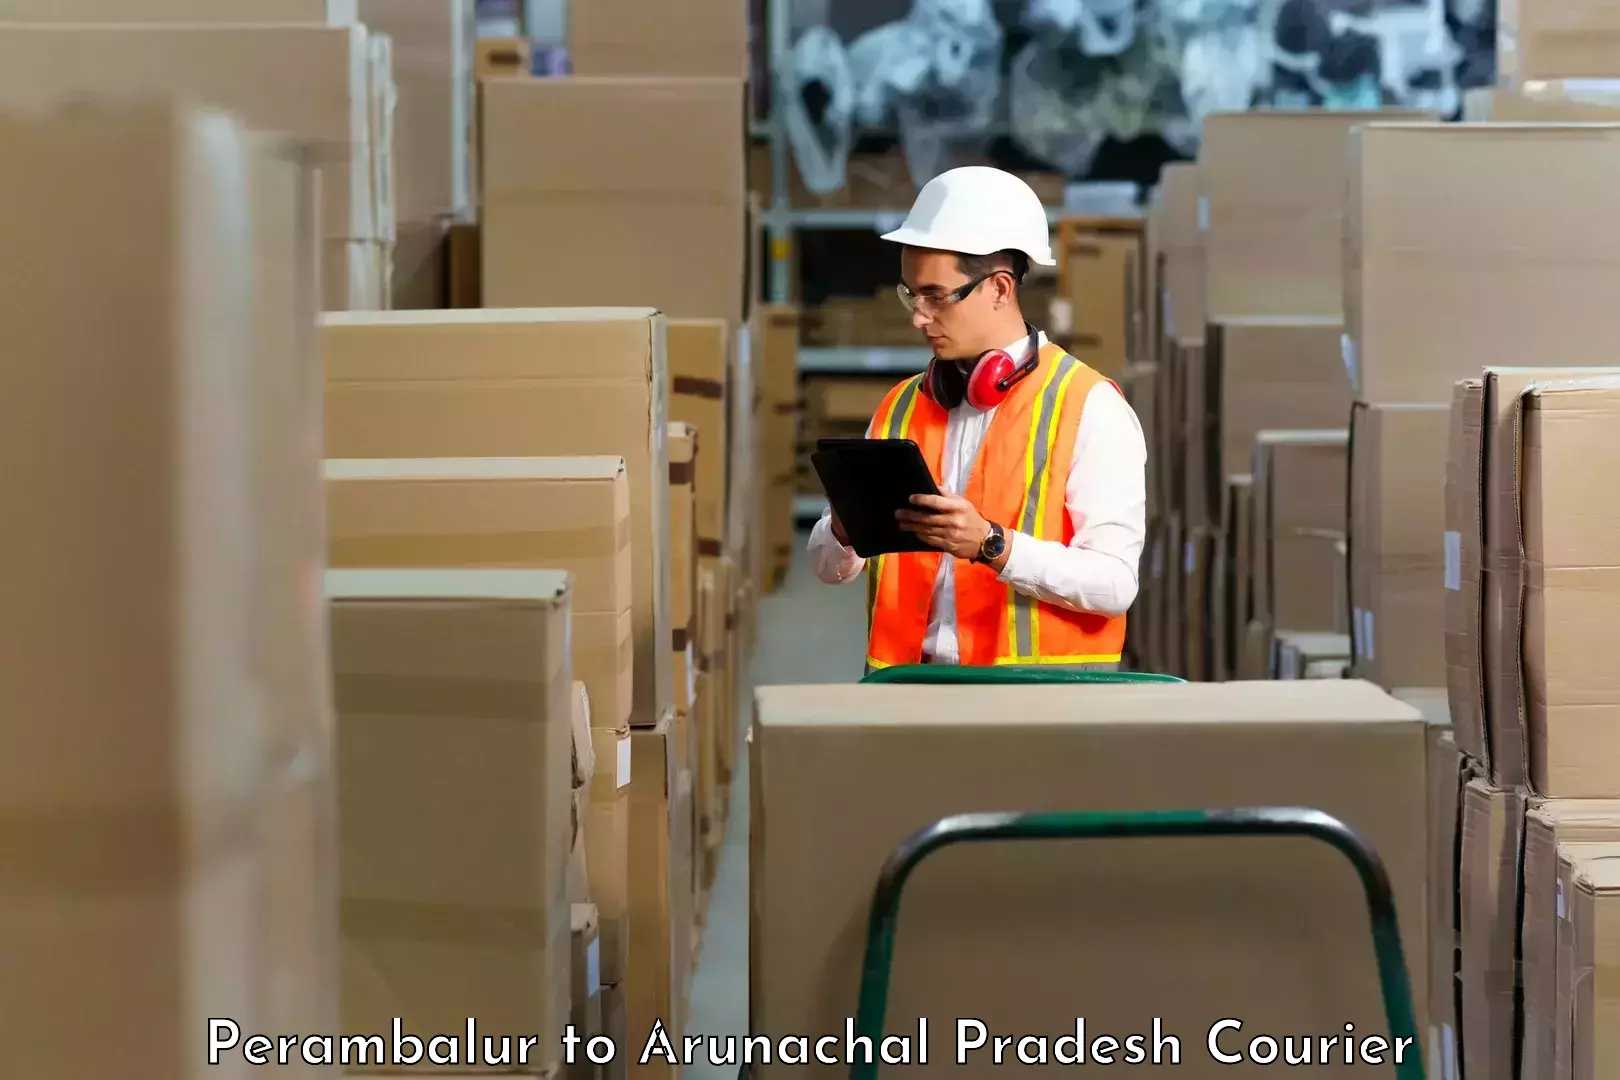 State-of-the-art courier technology Perambalur to Pasighat